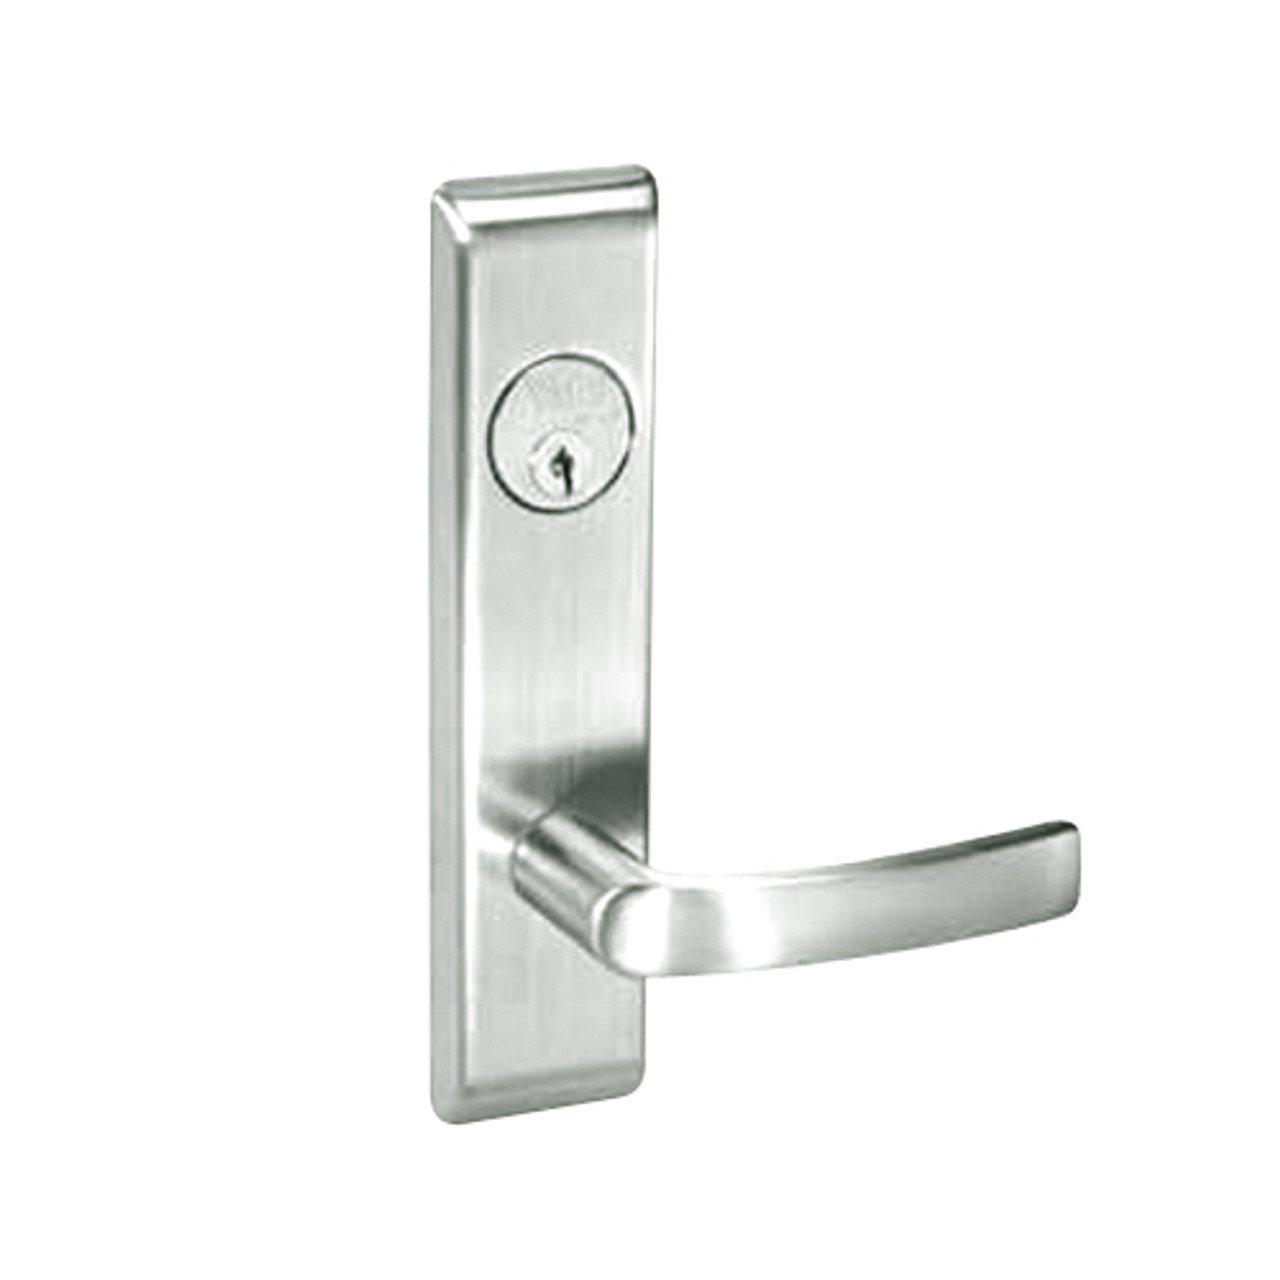 MOCN8829FL-618 Yale 8800FL Series Single Cylinder Mortise Closet Locks with Monroe Lever in Bright Nickel